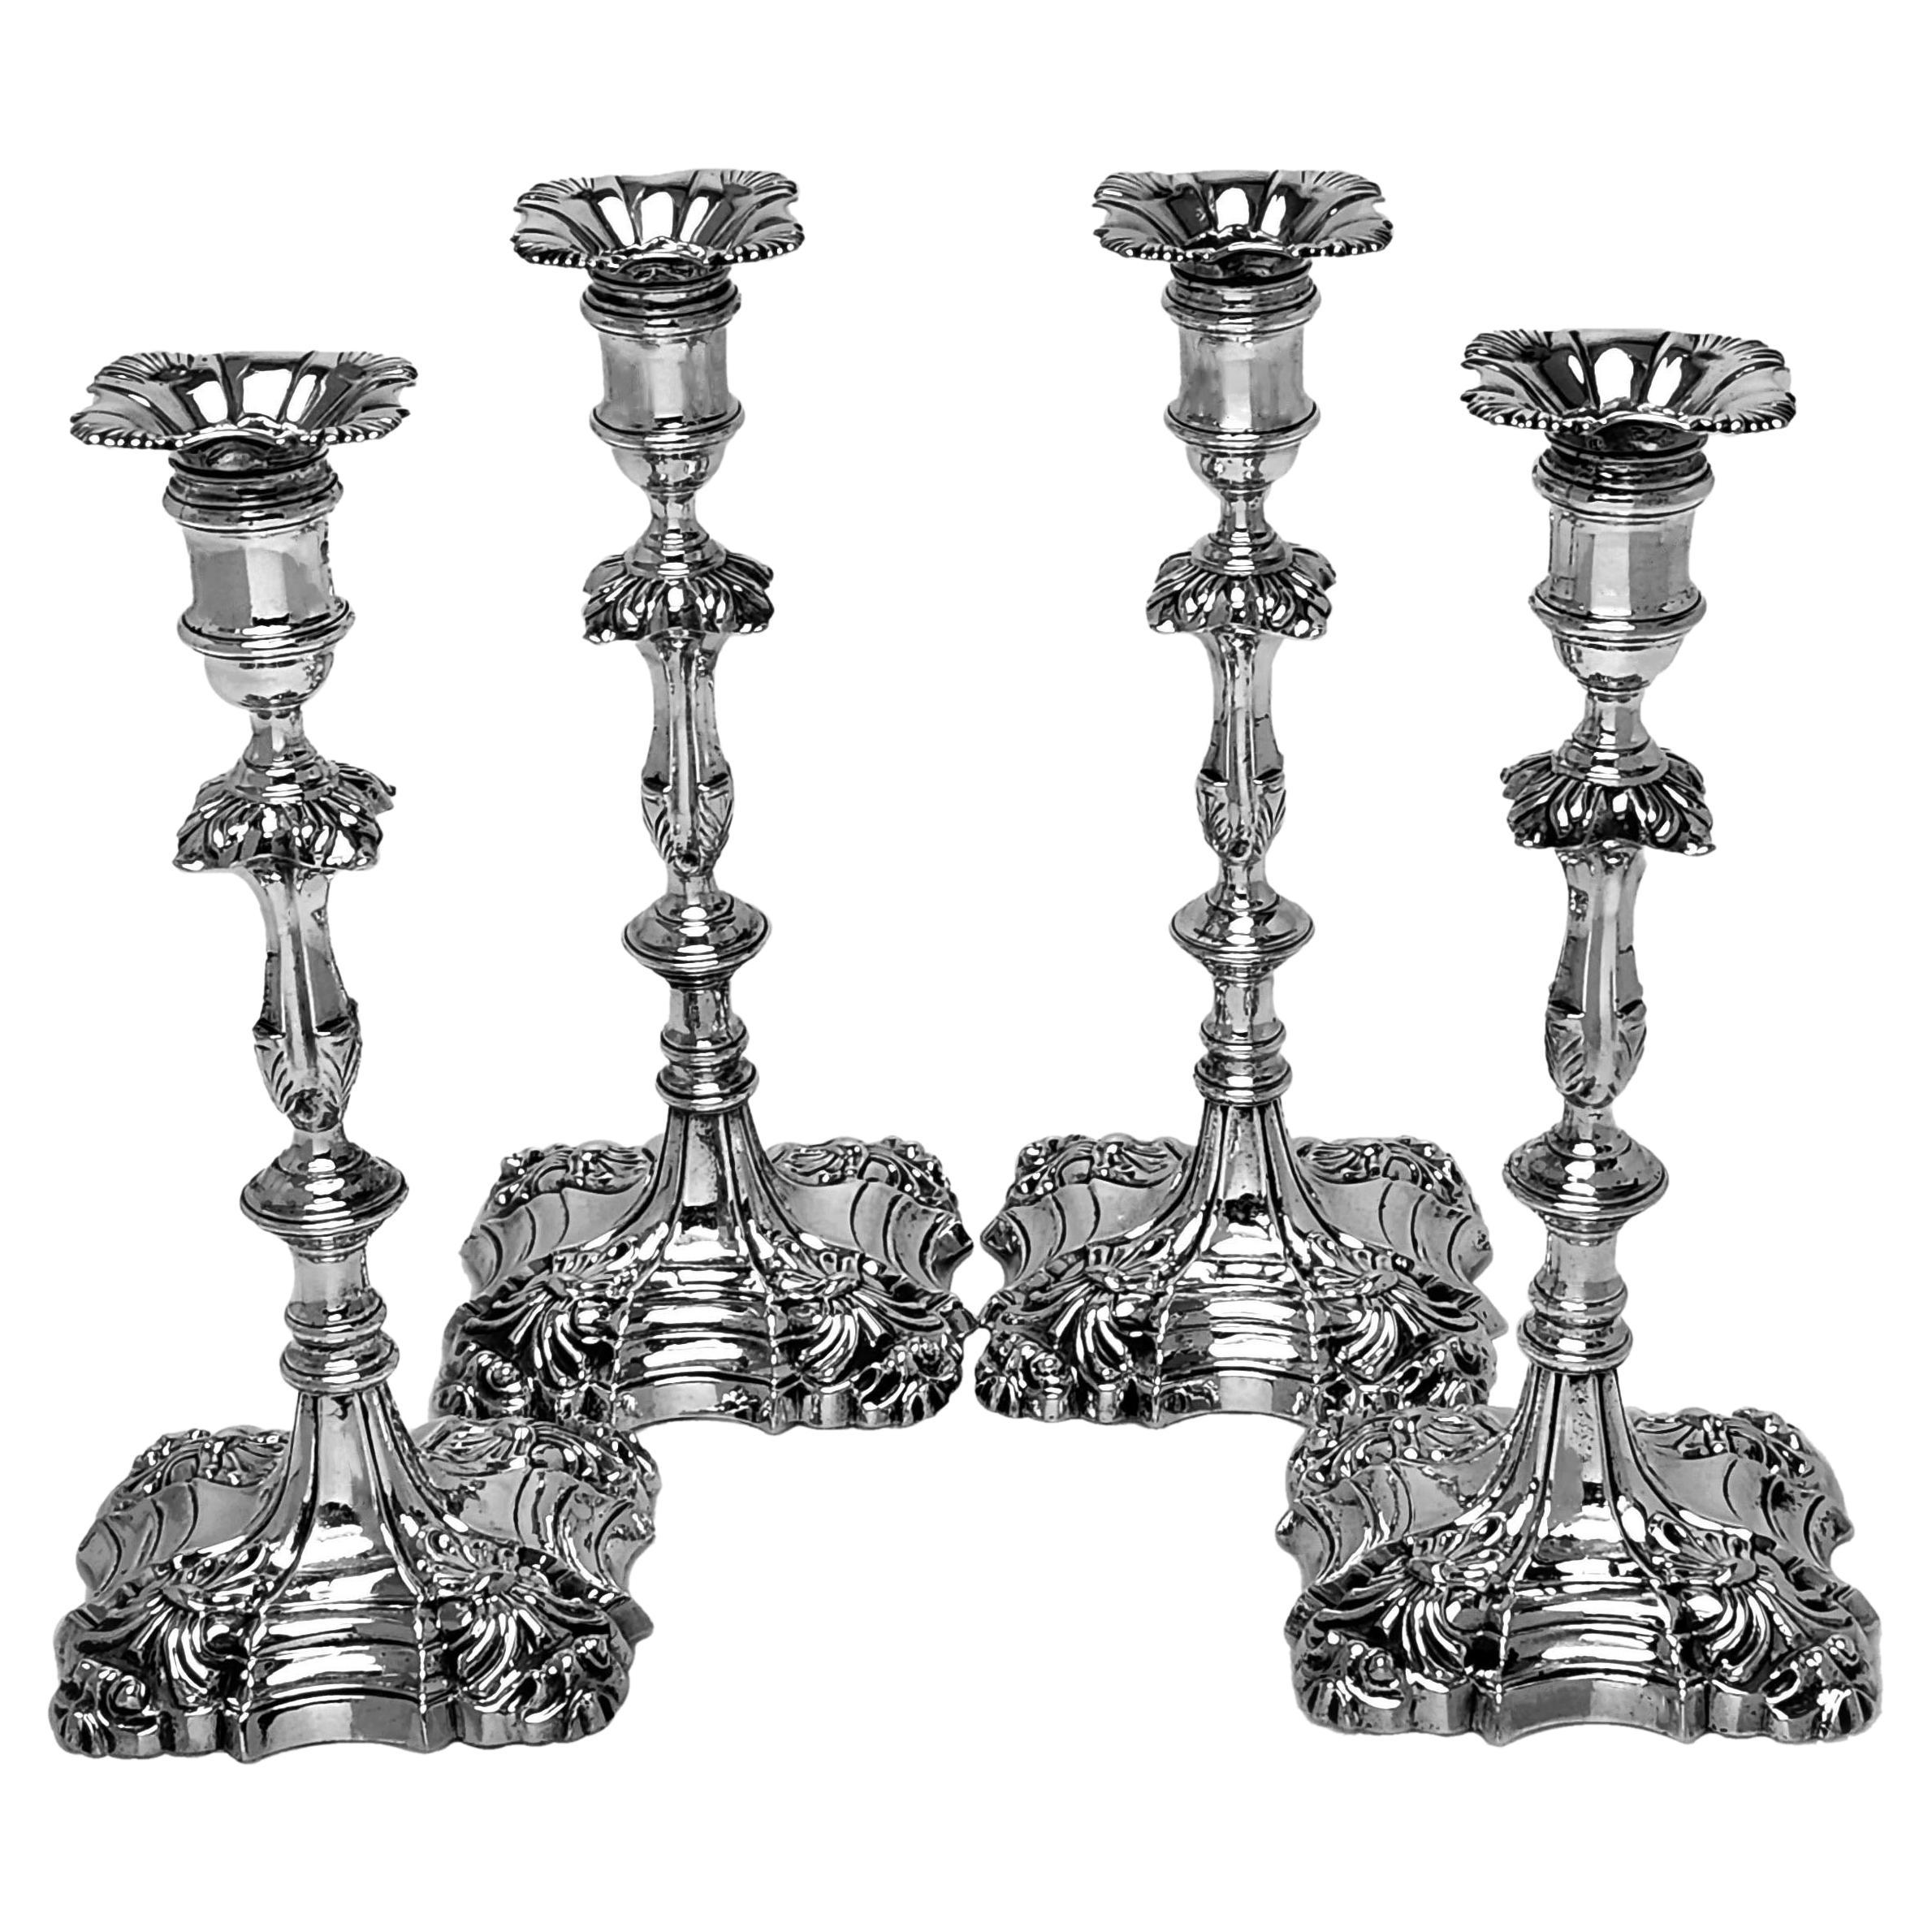 Set of 4 George II Cast Silver Candlesticks 1759 Candle Holders